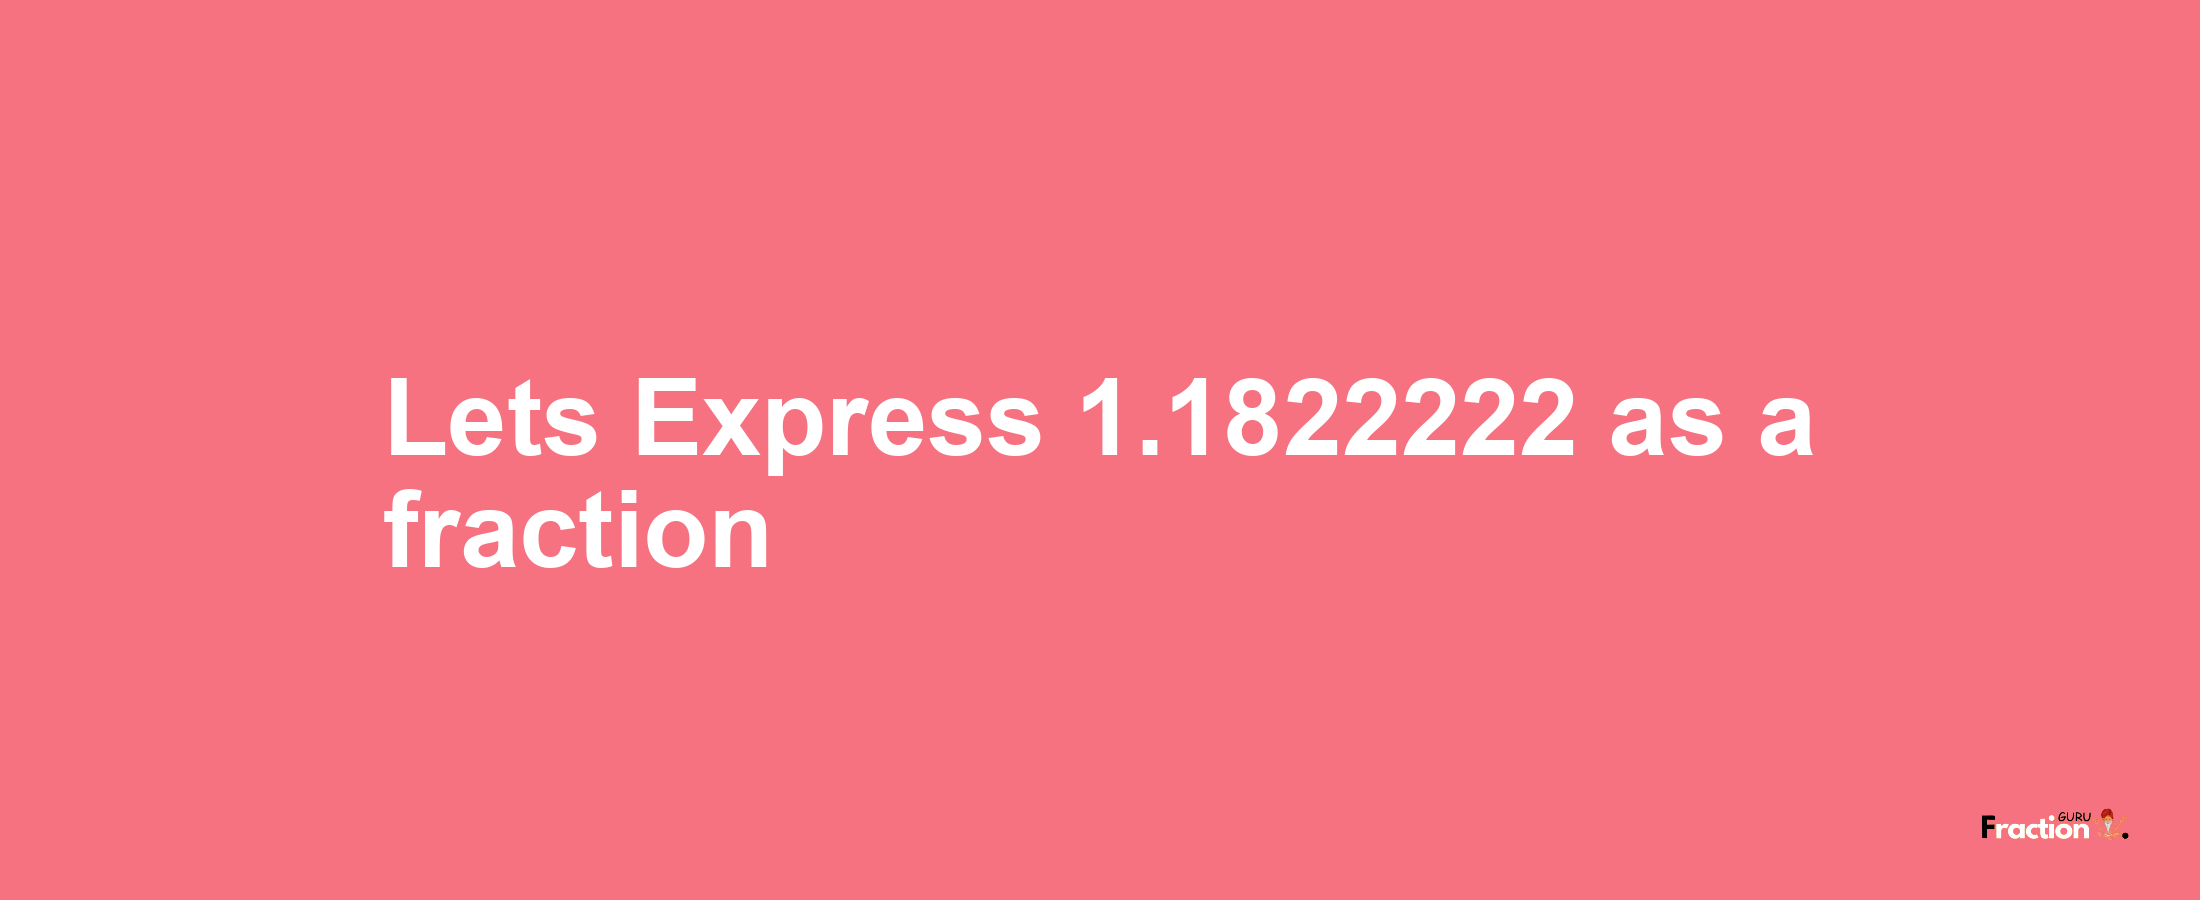 Lets Express 1.1822222 as afraction